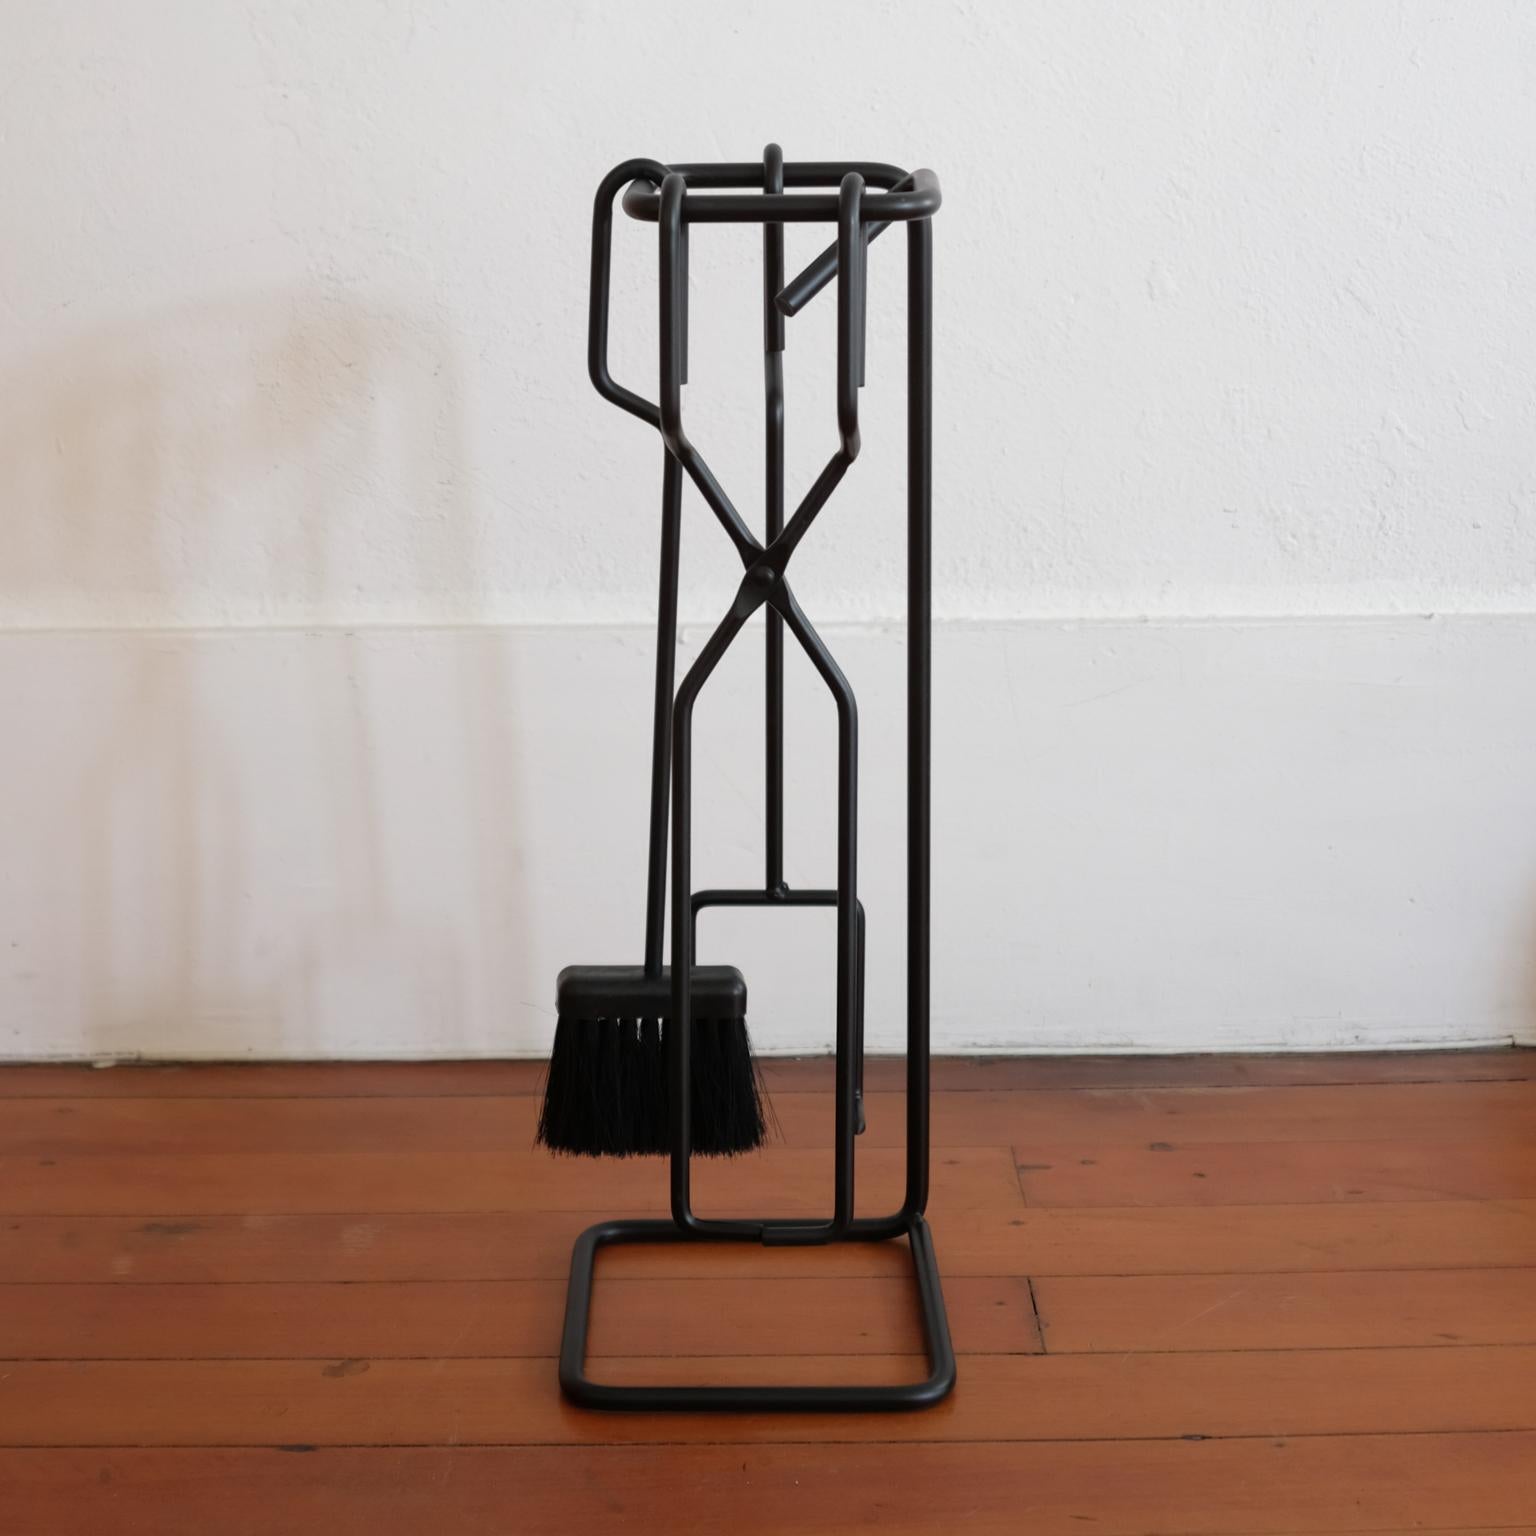 Set of iron fireplace tools hung on a sculptural iron stand. USA, 1950s.